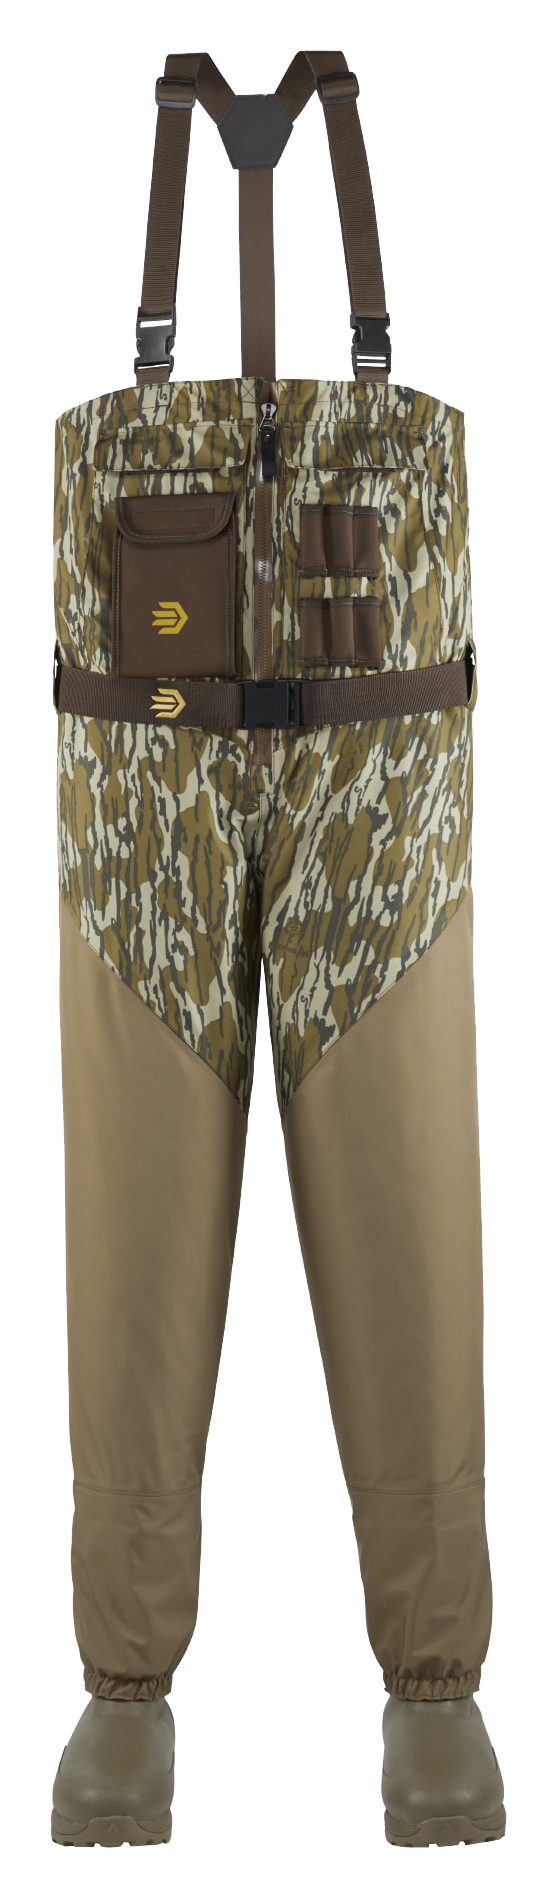 LaCrosse Alpha Agility Select Insulated Front-Zip Breathable Hunting Waders for Men - Mossy Oak Original Bottomland - 10/Stout